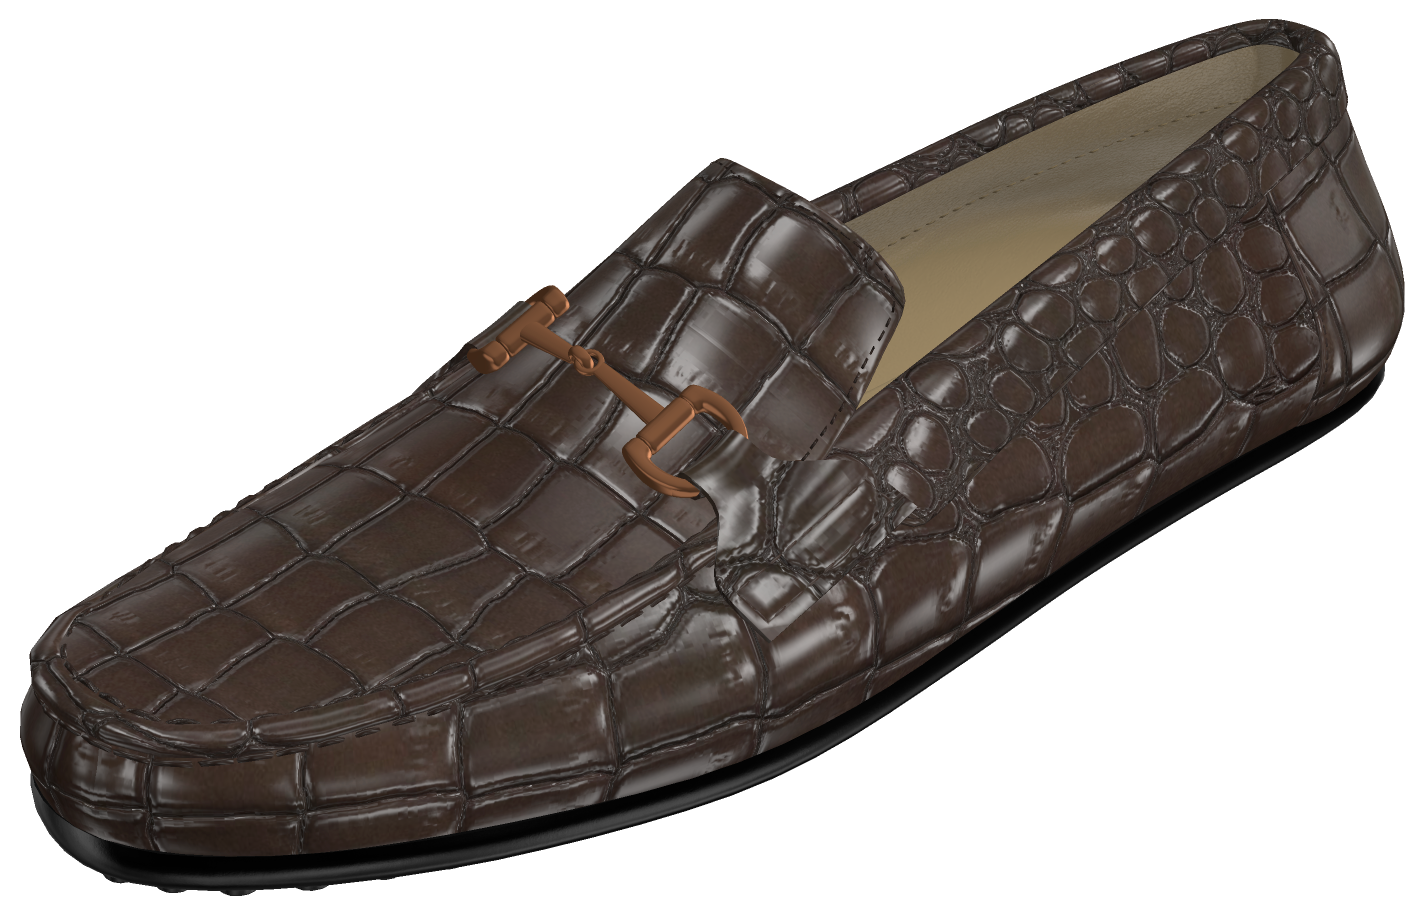 Take your look to the next level with the Marcello comfort Chocolate Gator Driver shoes. Handcrafted in Spain with luxe chocolate leather, alligator stamped for rich style and grip rubber soles, these shoes make a fashionable impression with their classic fit and comfortable foot bed. Perfect for any occasion. A great look with jeans or shorts.